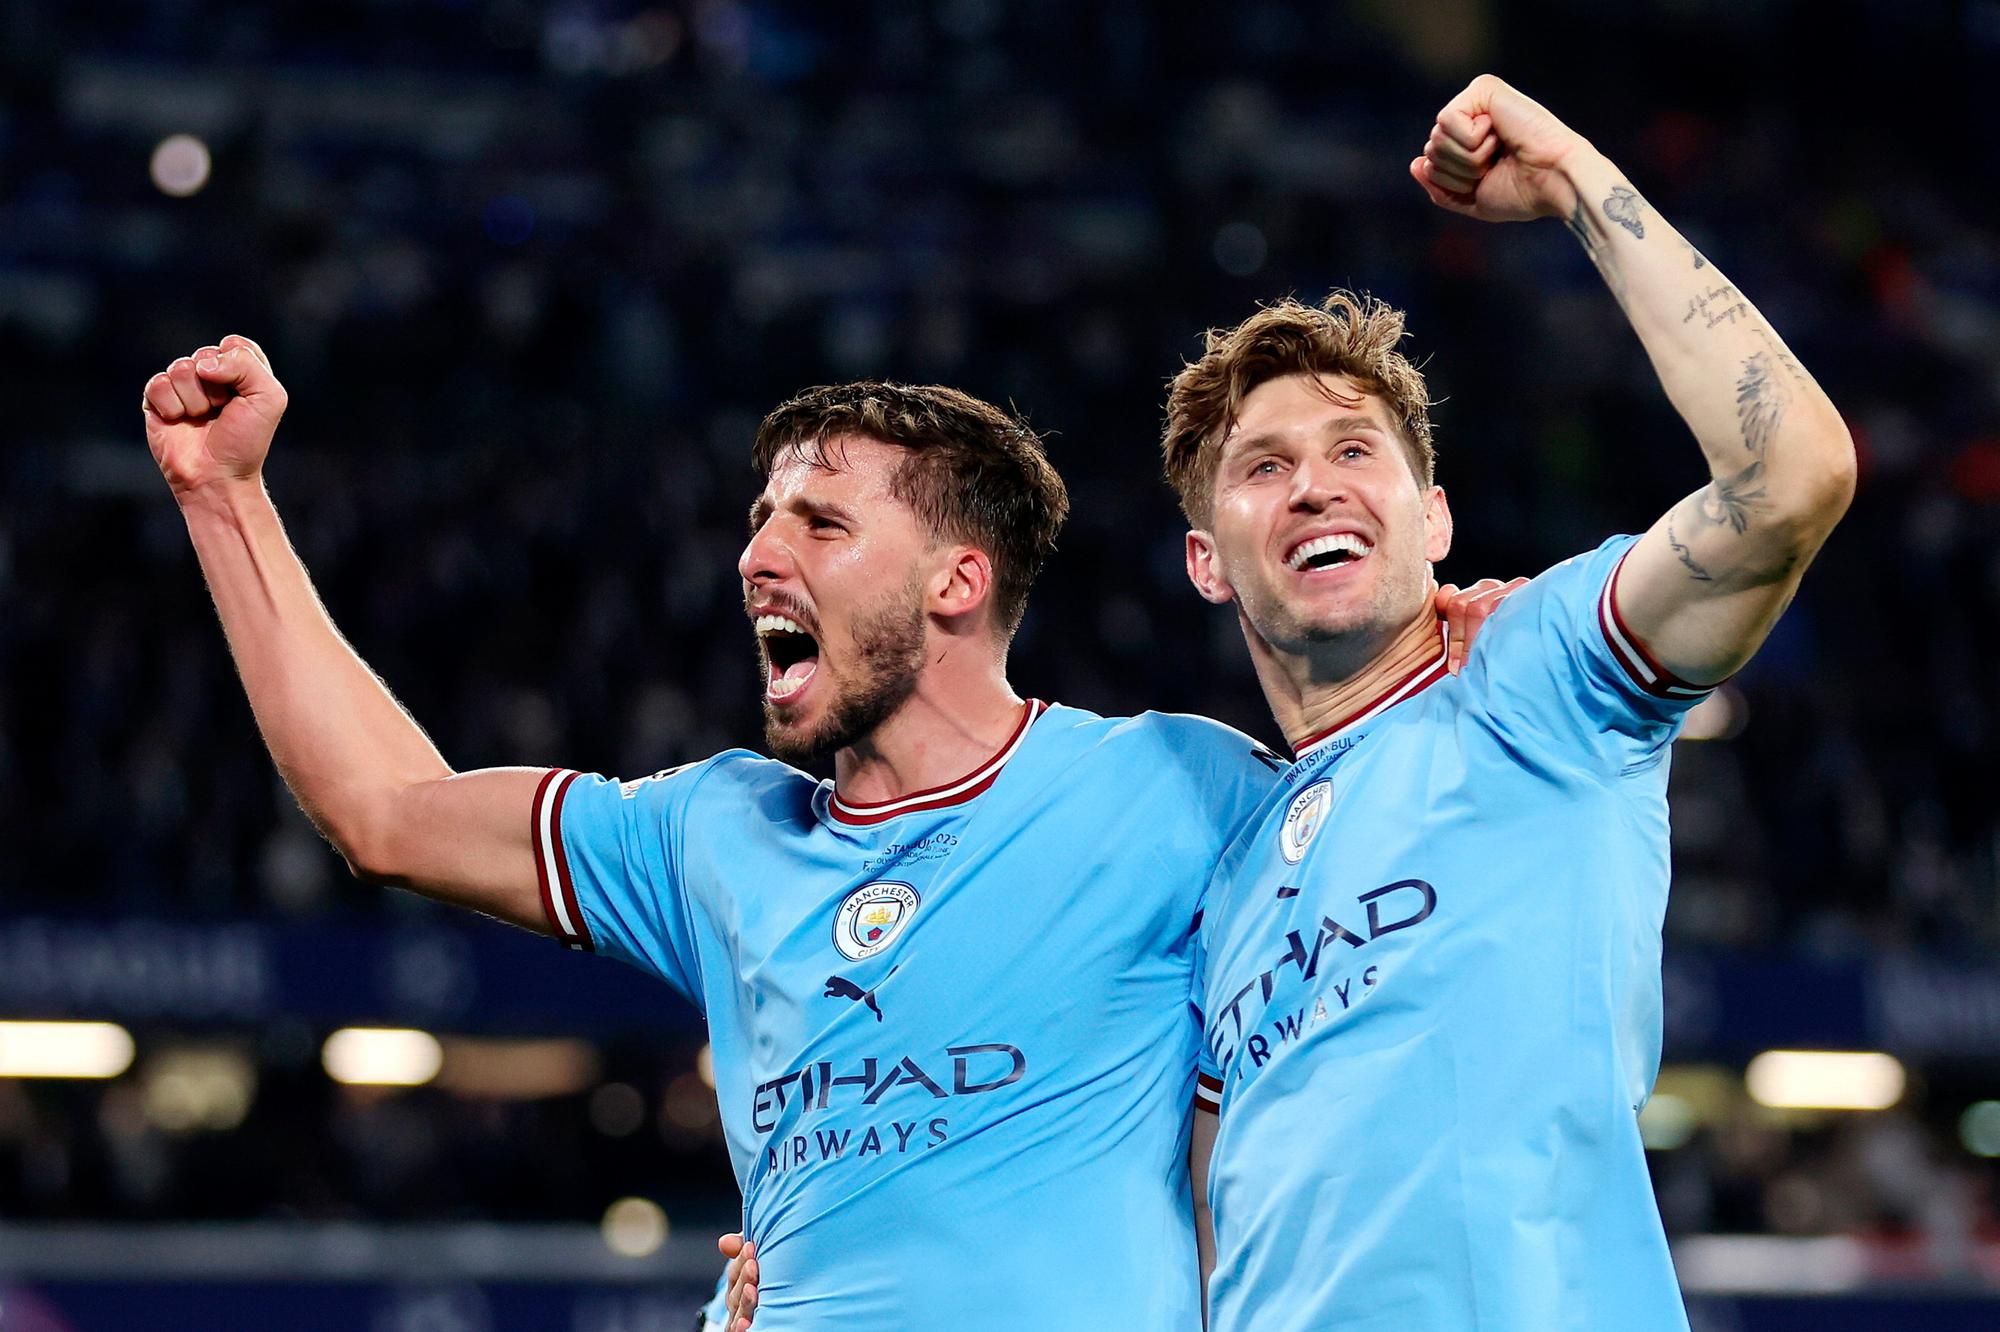 Manchester City's Rúben Dias: 'If we think too far ahead it will kill us', Manchester City